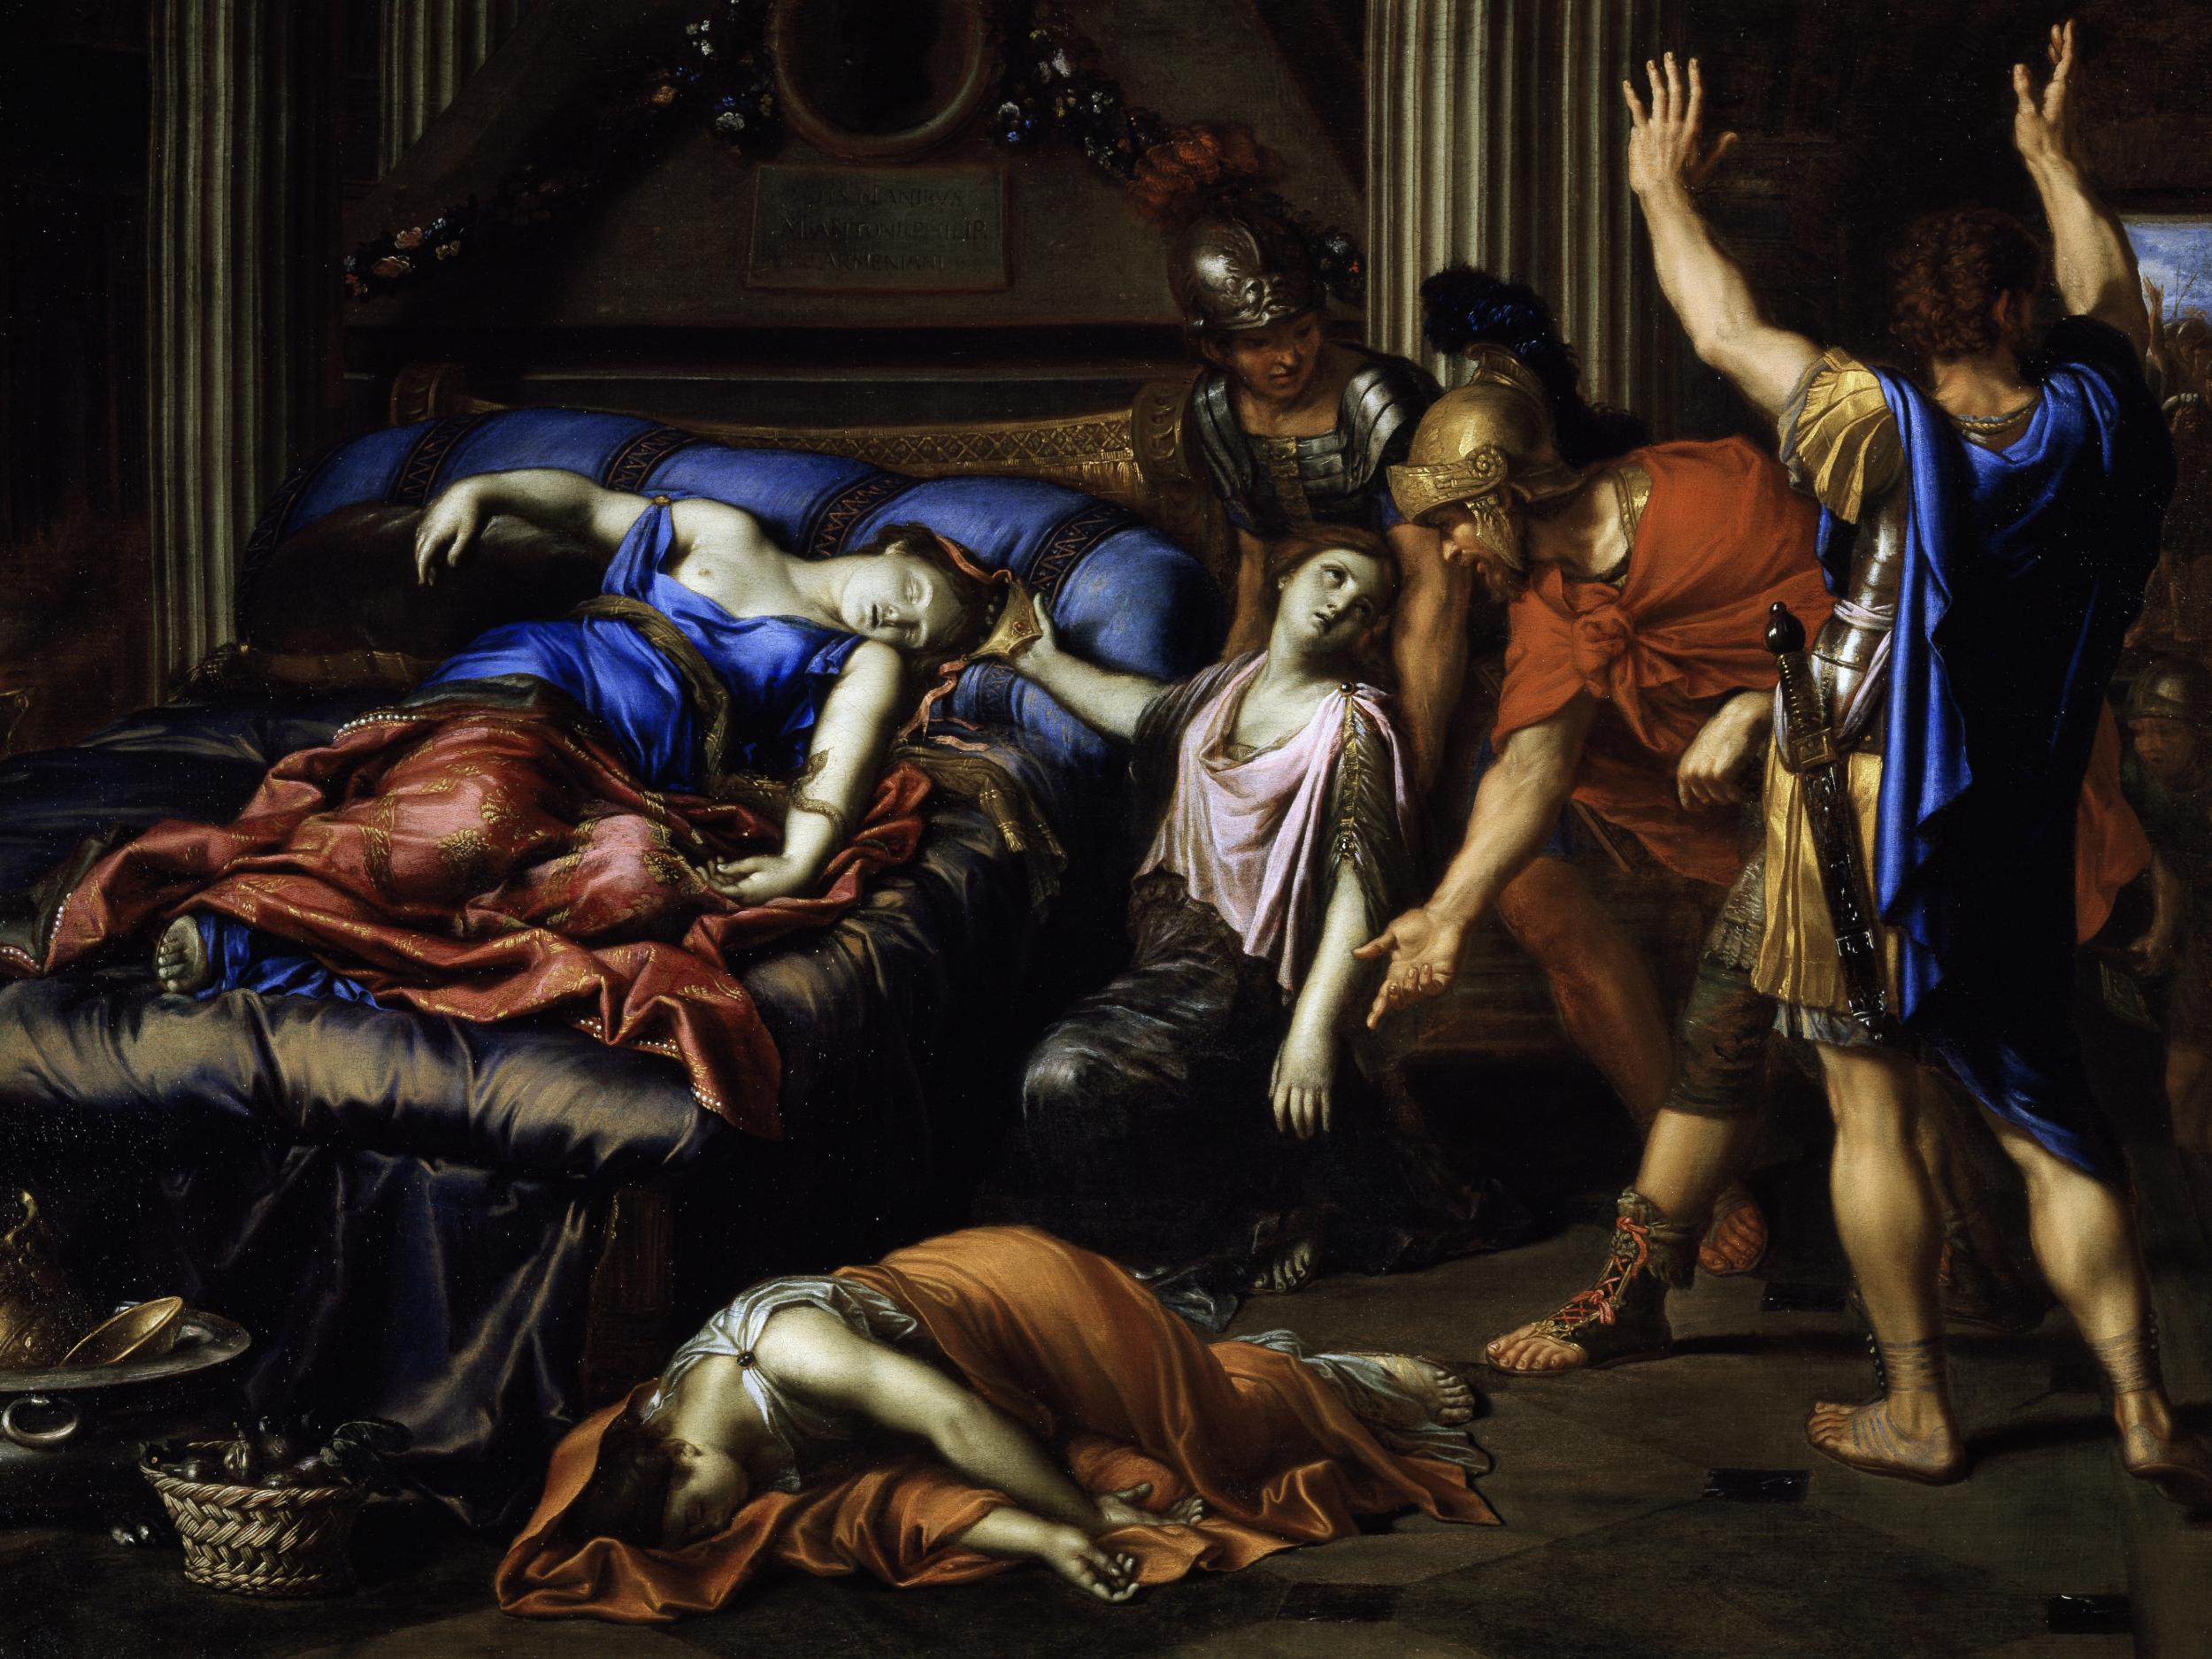 Age cannot wither her: Pierre Mignard’s 1635 depiction of the death of Cleopatra, arguably Shakespeare’s most transformative female character, whom he gifted with ‘a grasp of her own fate and a new autonomy of spirit’